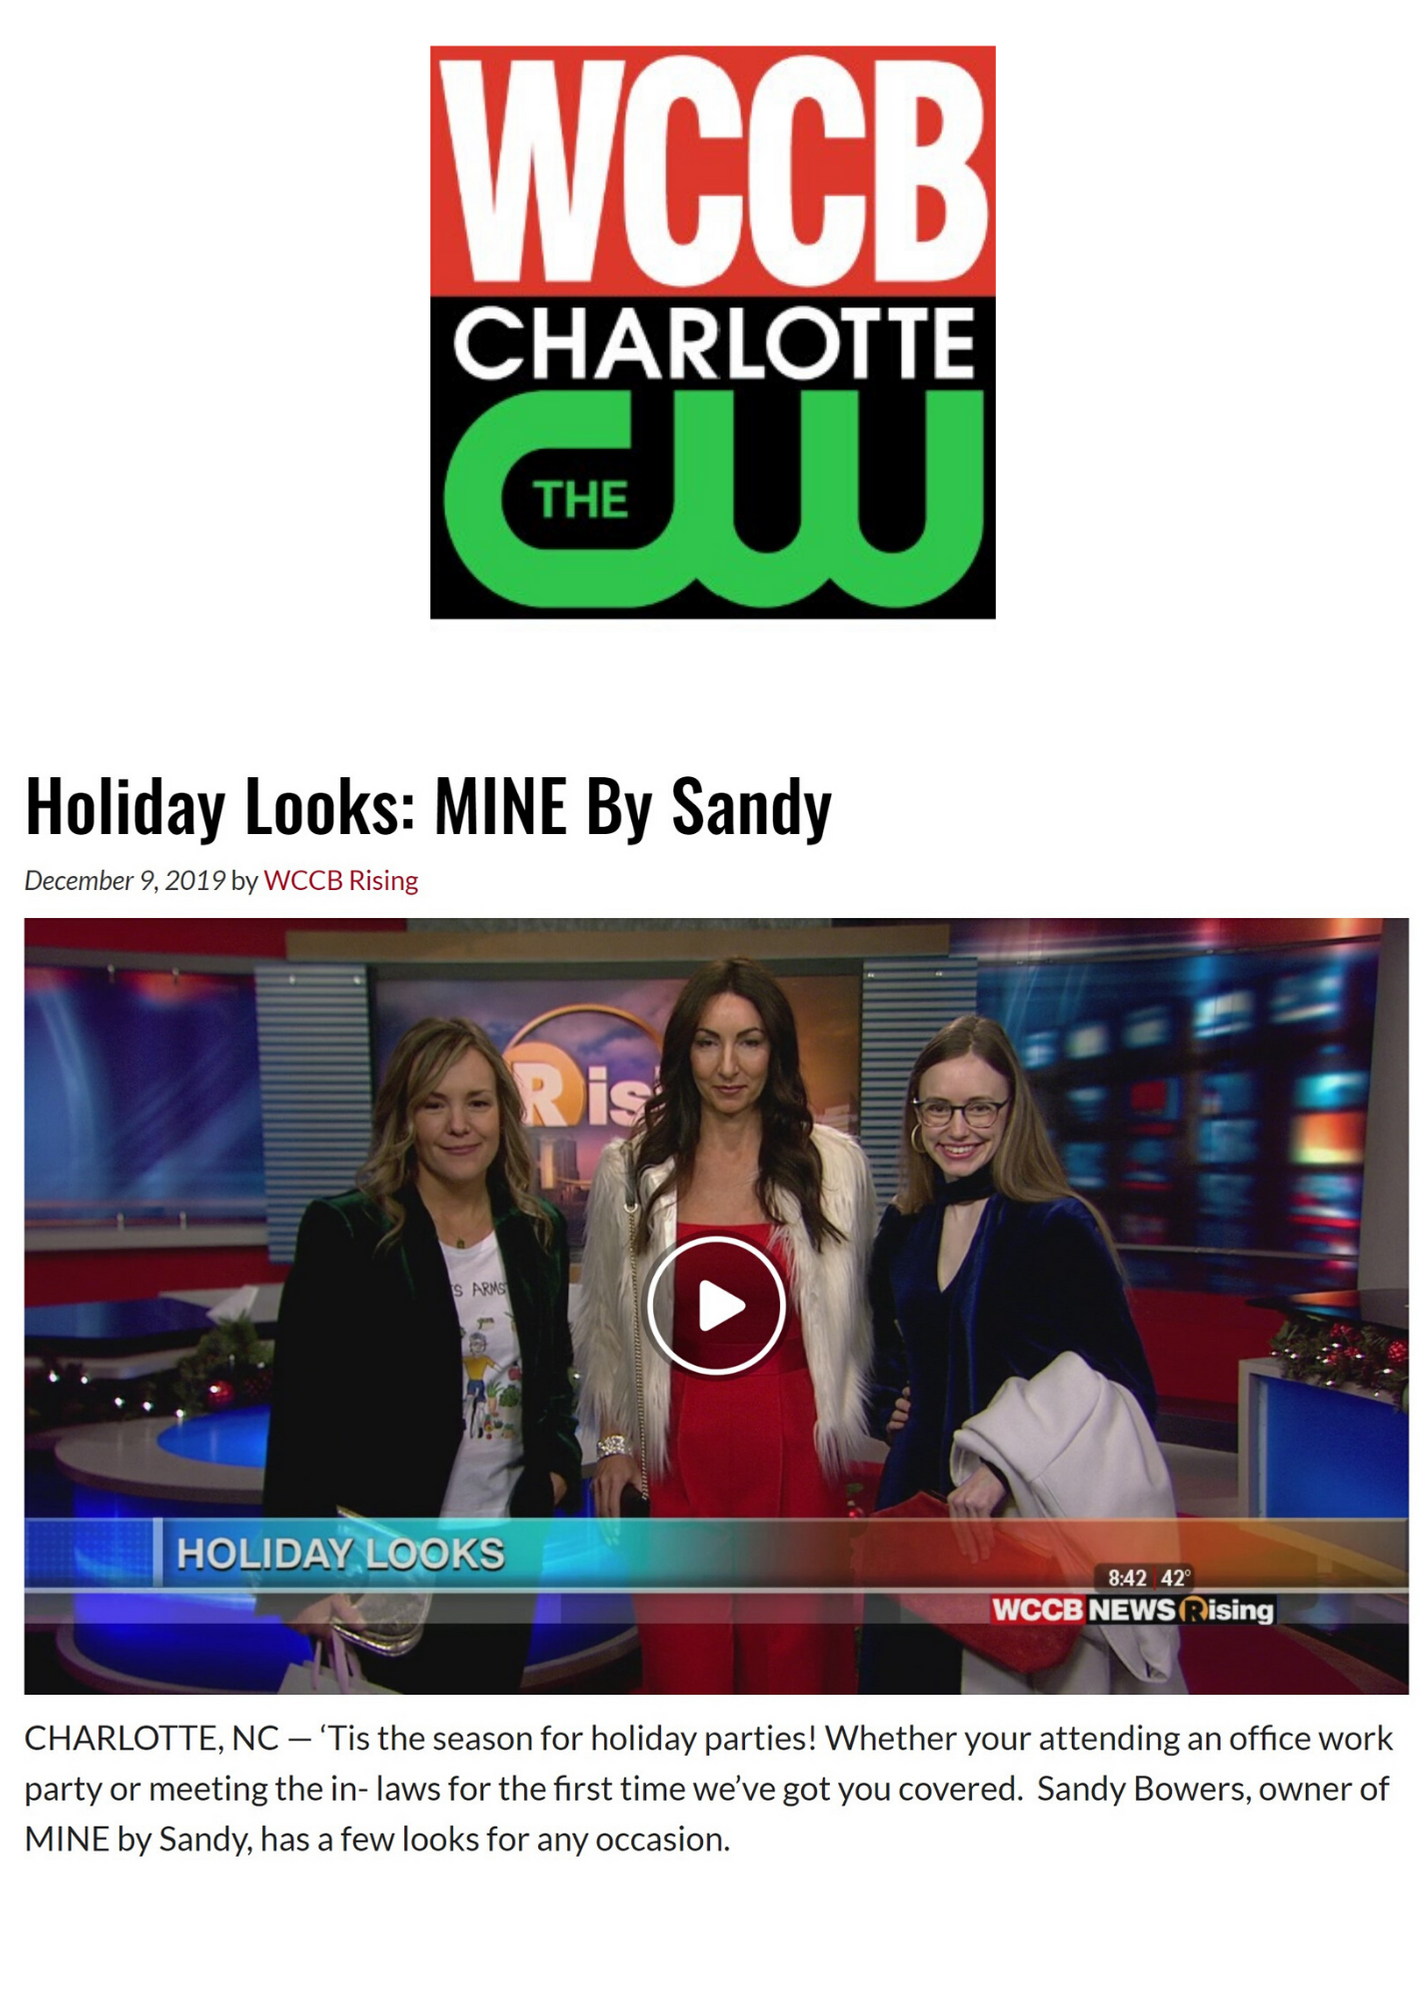 WCCB Charlotte - Holiday Looks